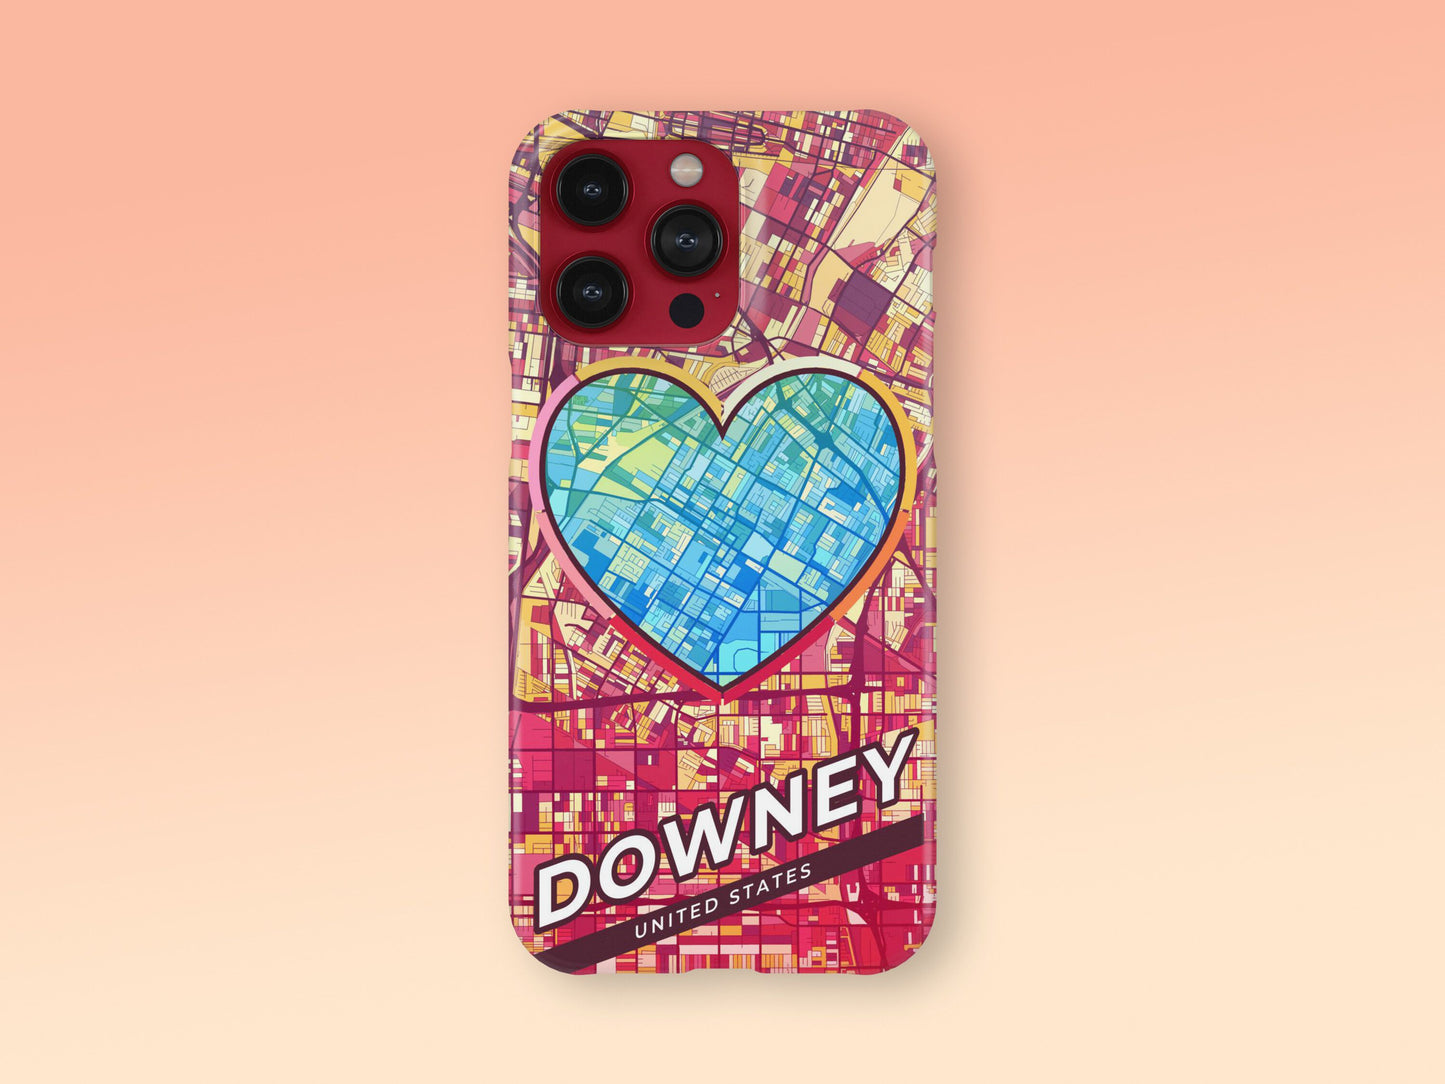 Downey California slim phone case with colorful icon. Birthday, wedding or housewarming gift. Couple match cases. 2